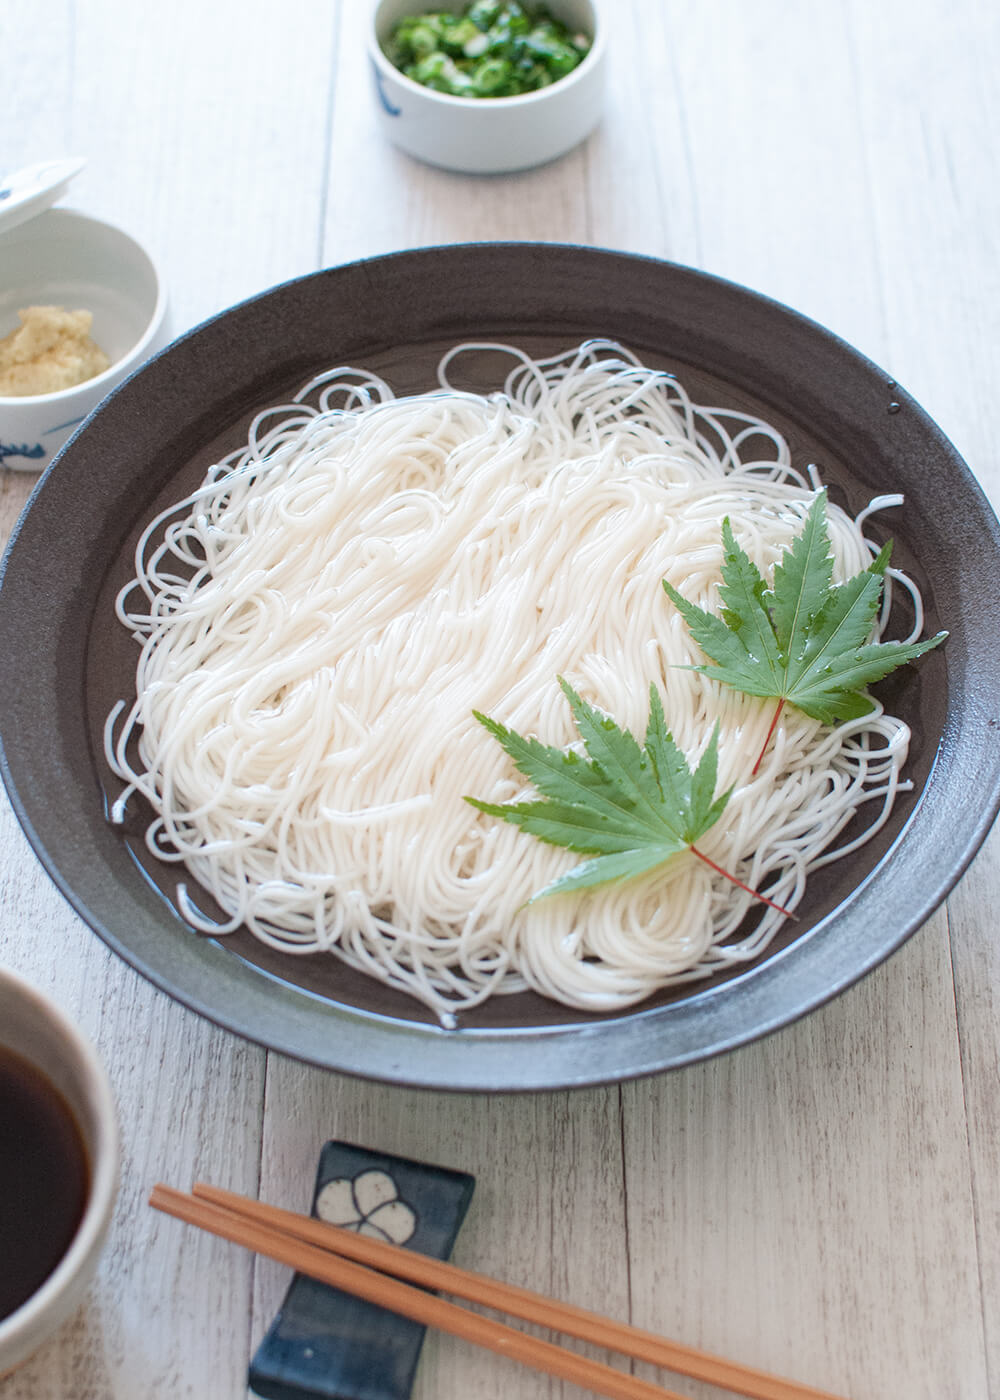 Somen (or sōmen) is a very thin noodles served cold which makes it a perfect summer dish. Noodles are served in chilled water and the dipping sauce is also chilled.